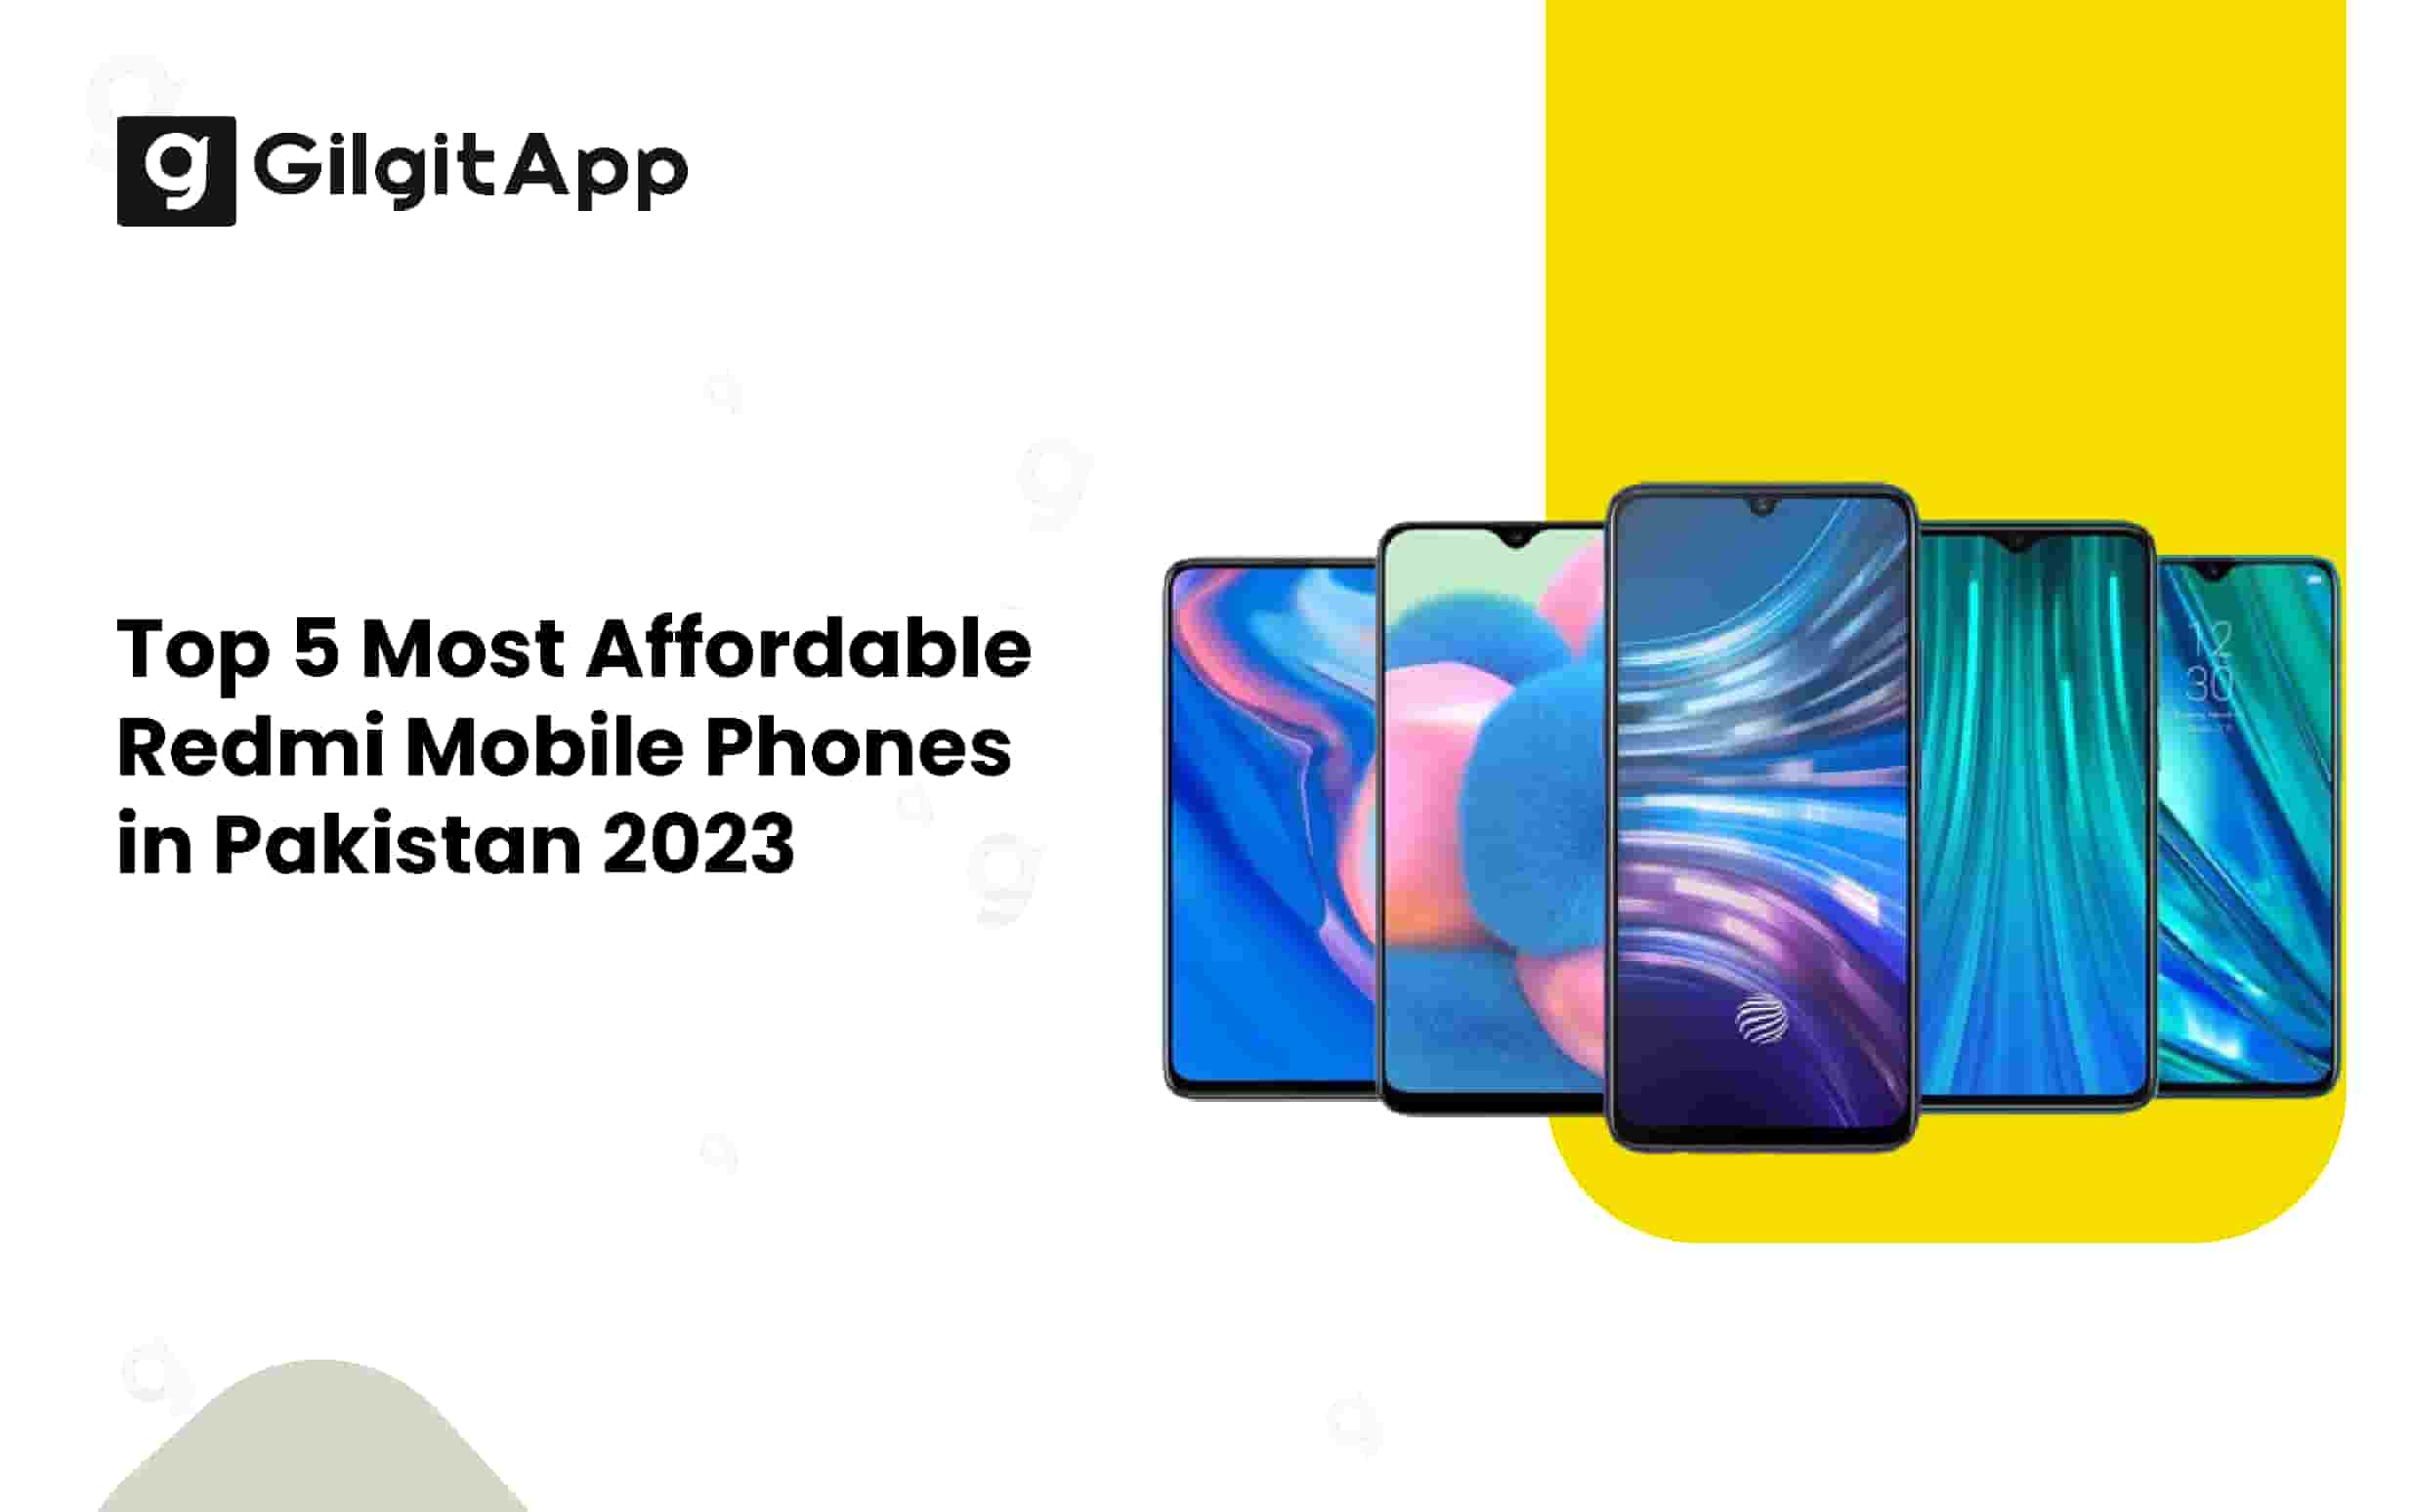 Top 5 Most Cheapest Redmi Mobile Phones in Pakistan 2023